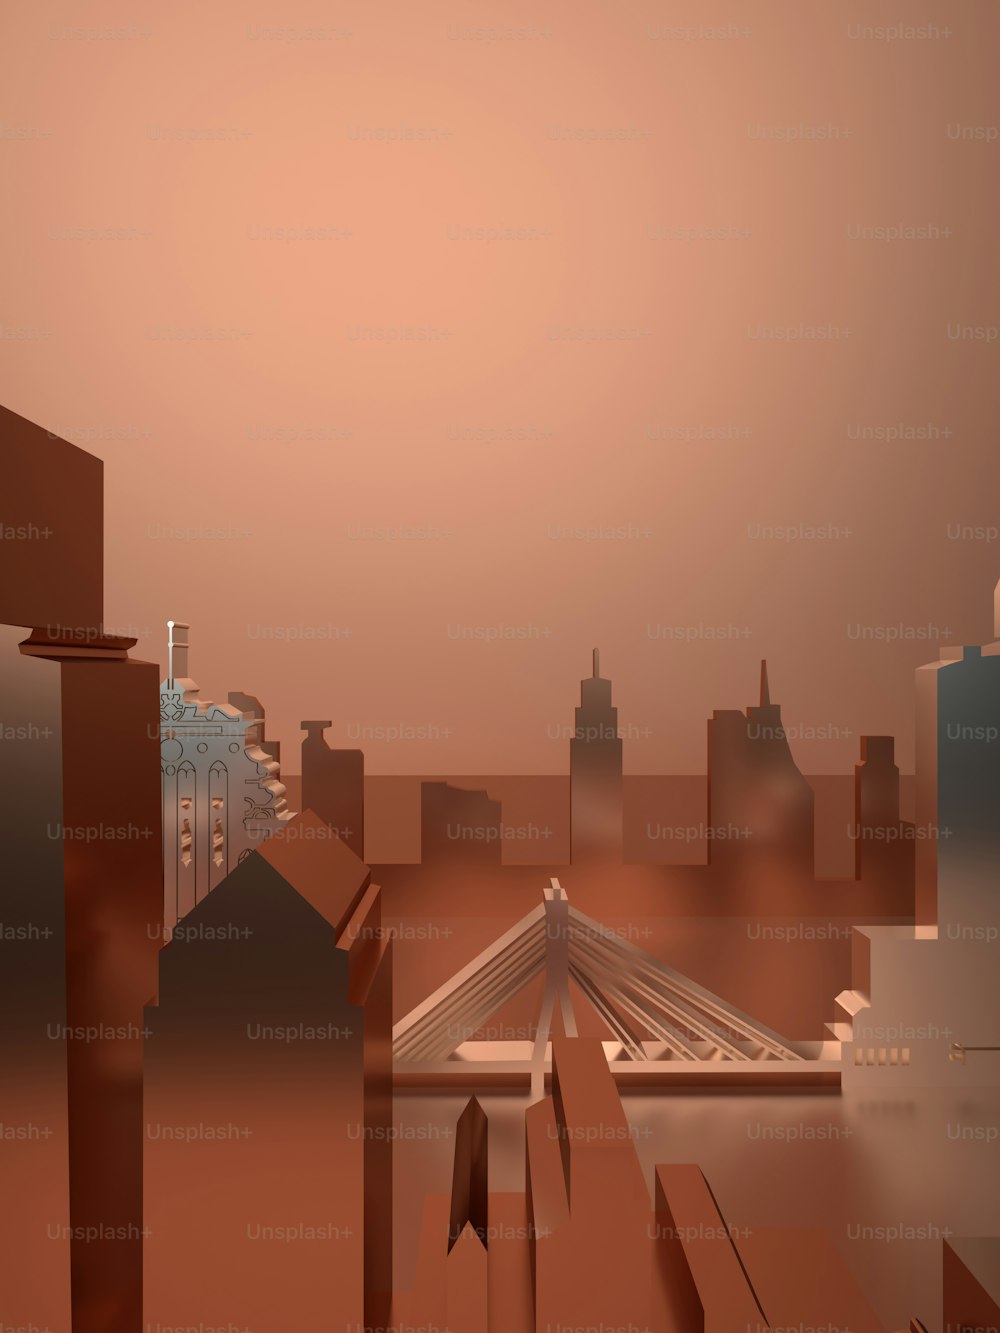 a digital painting of a city with a train on the tracks